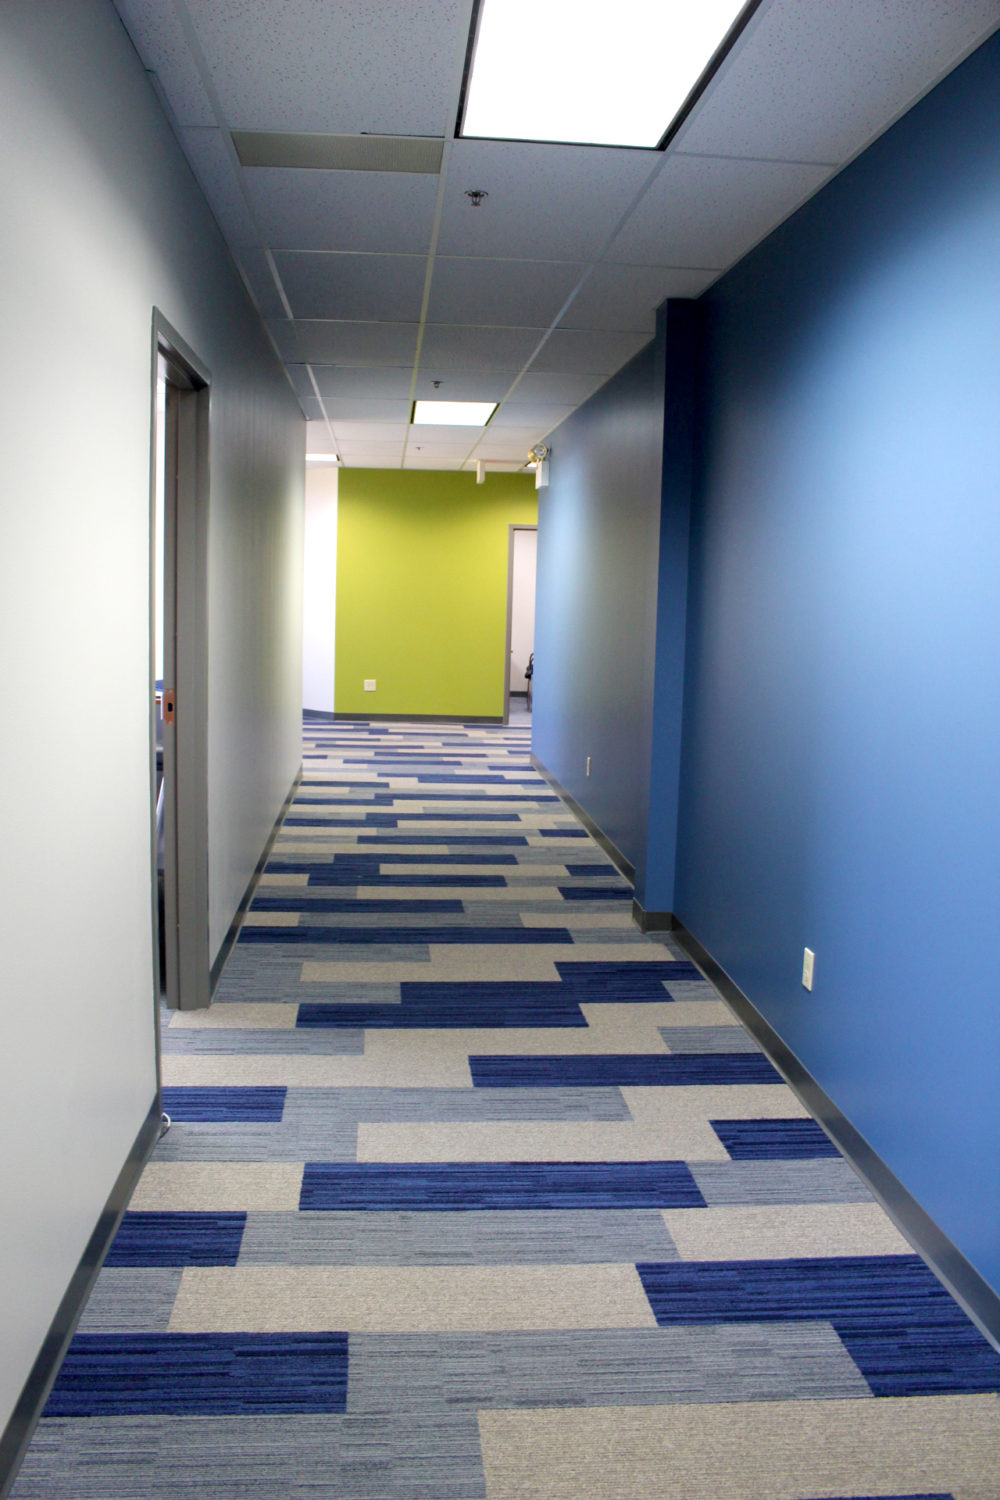 Dynamically Patterned Carpet in Hallway